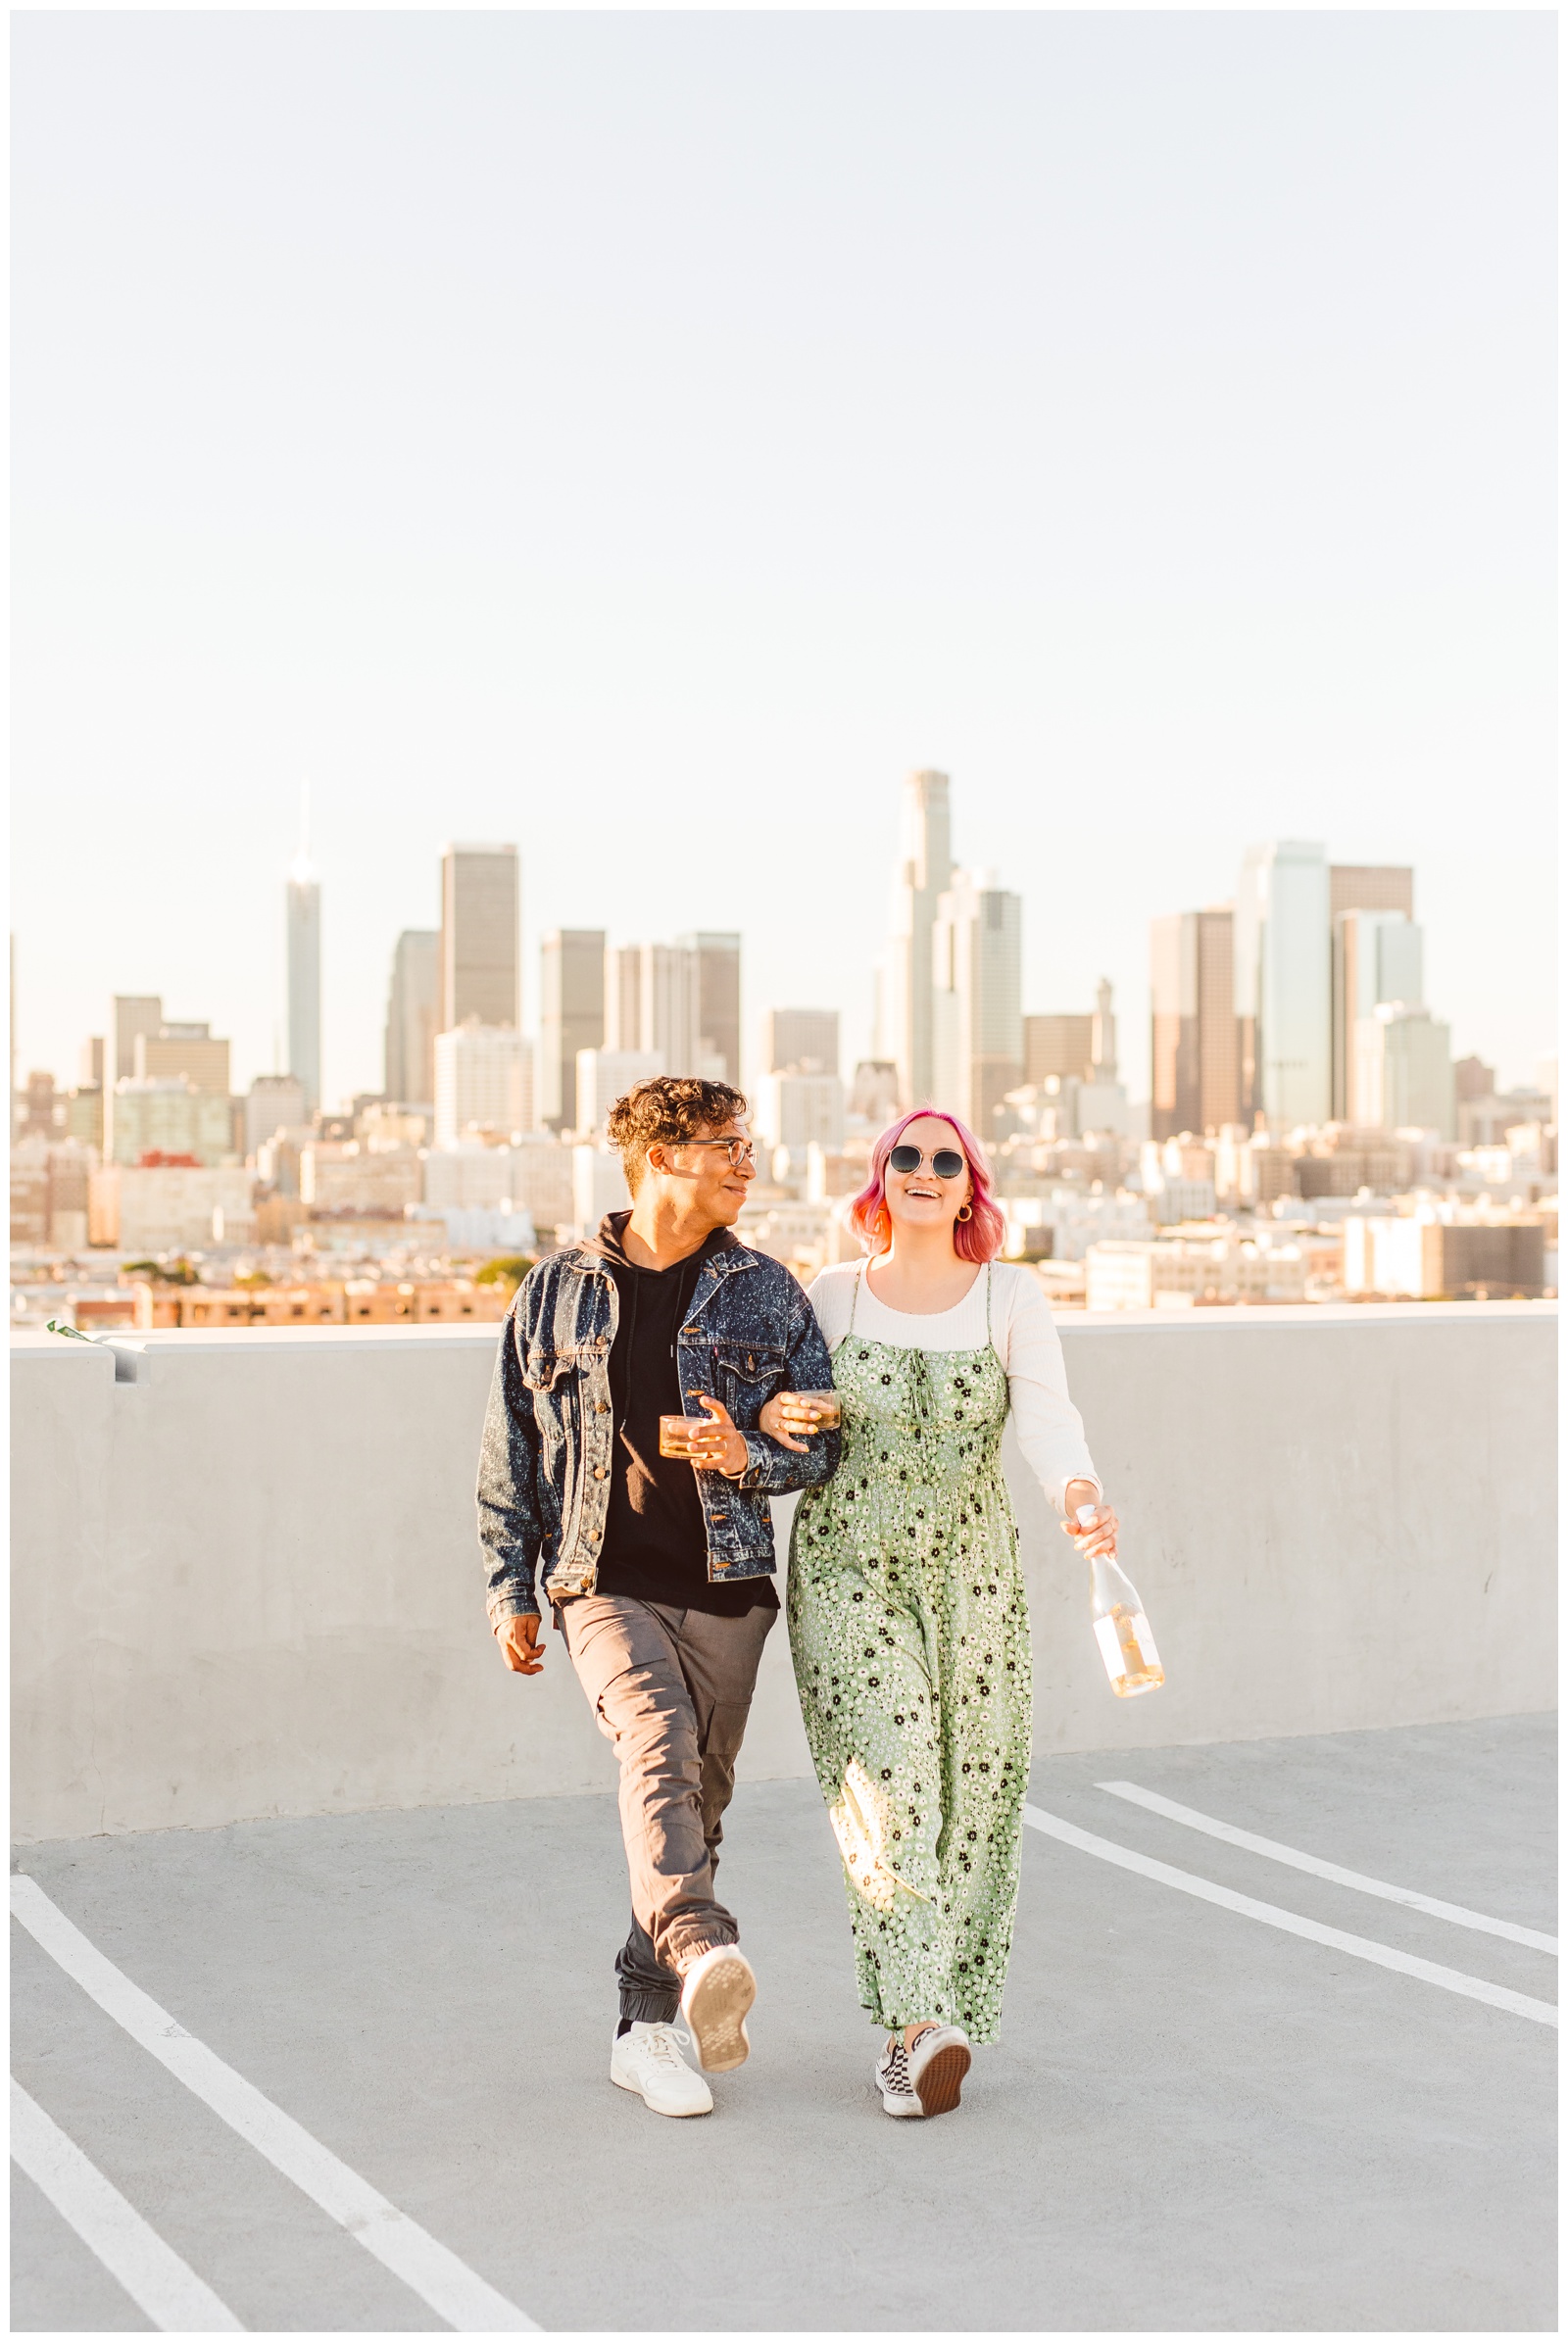 Downtown Los Angeles Rooftop Engagement Session - City Proposal Inspiration - Brooke Michelle Photo